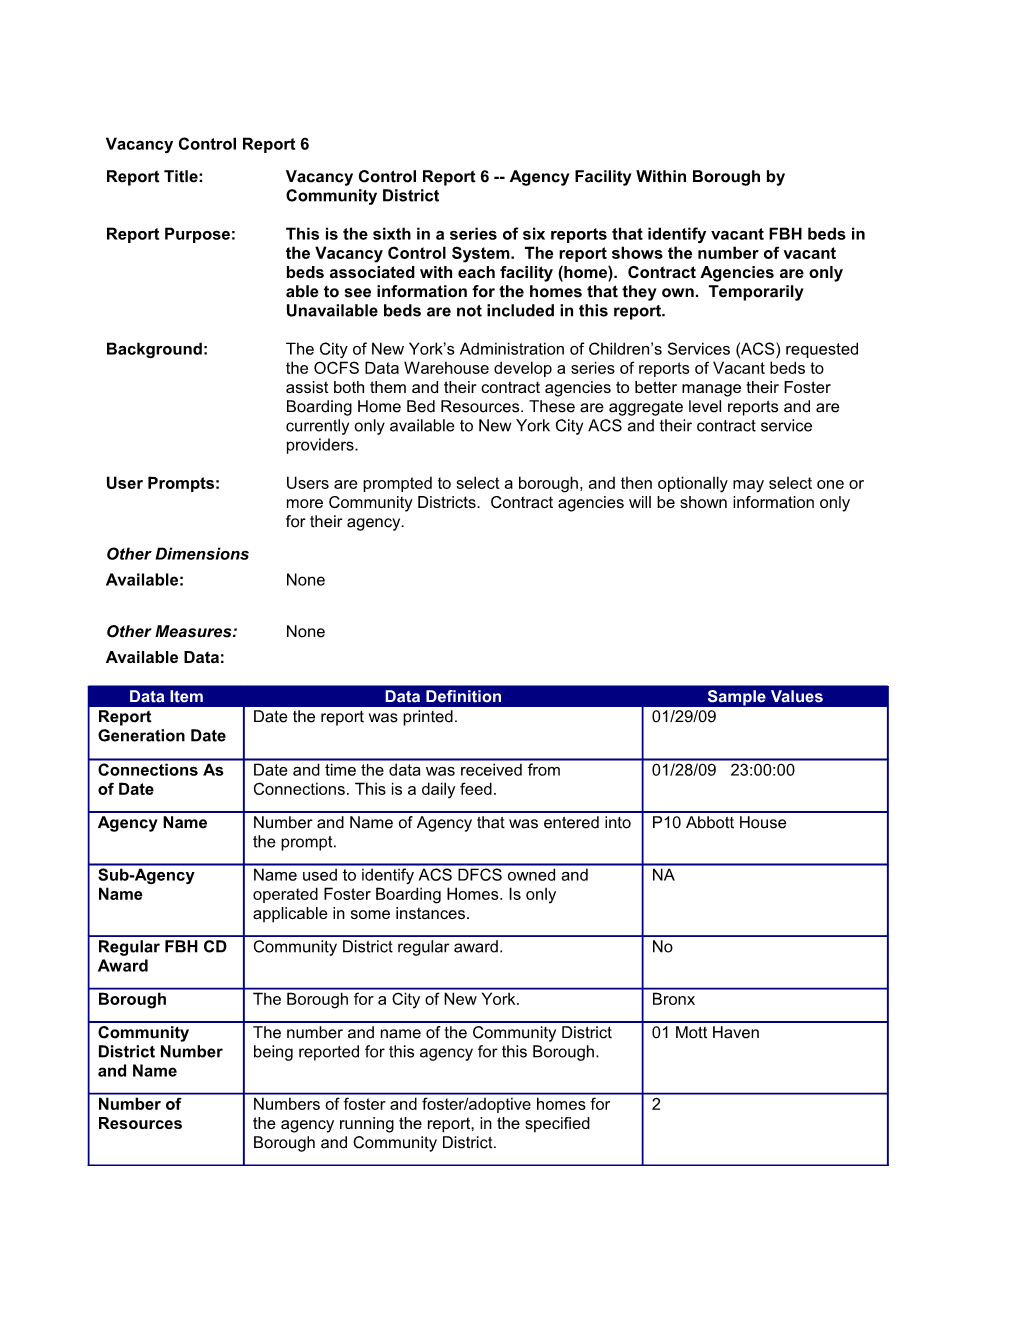 Report Title:Vacancy Control Report 6 Agency Facility Within Borough by Community District